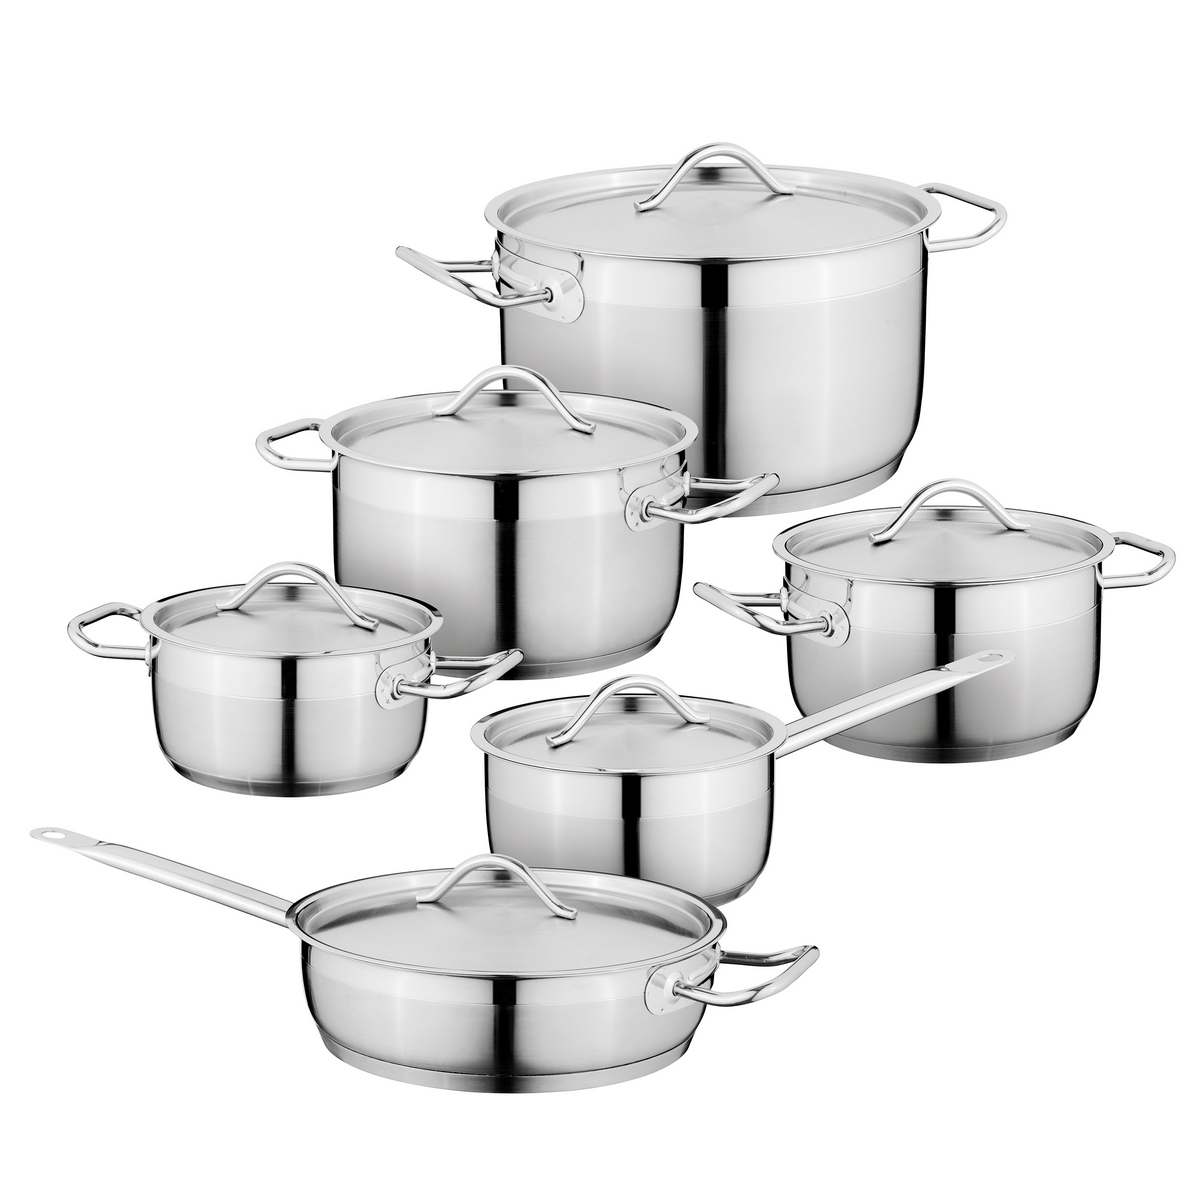 Cookware Set Cooking BergHOFF Vision Studio